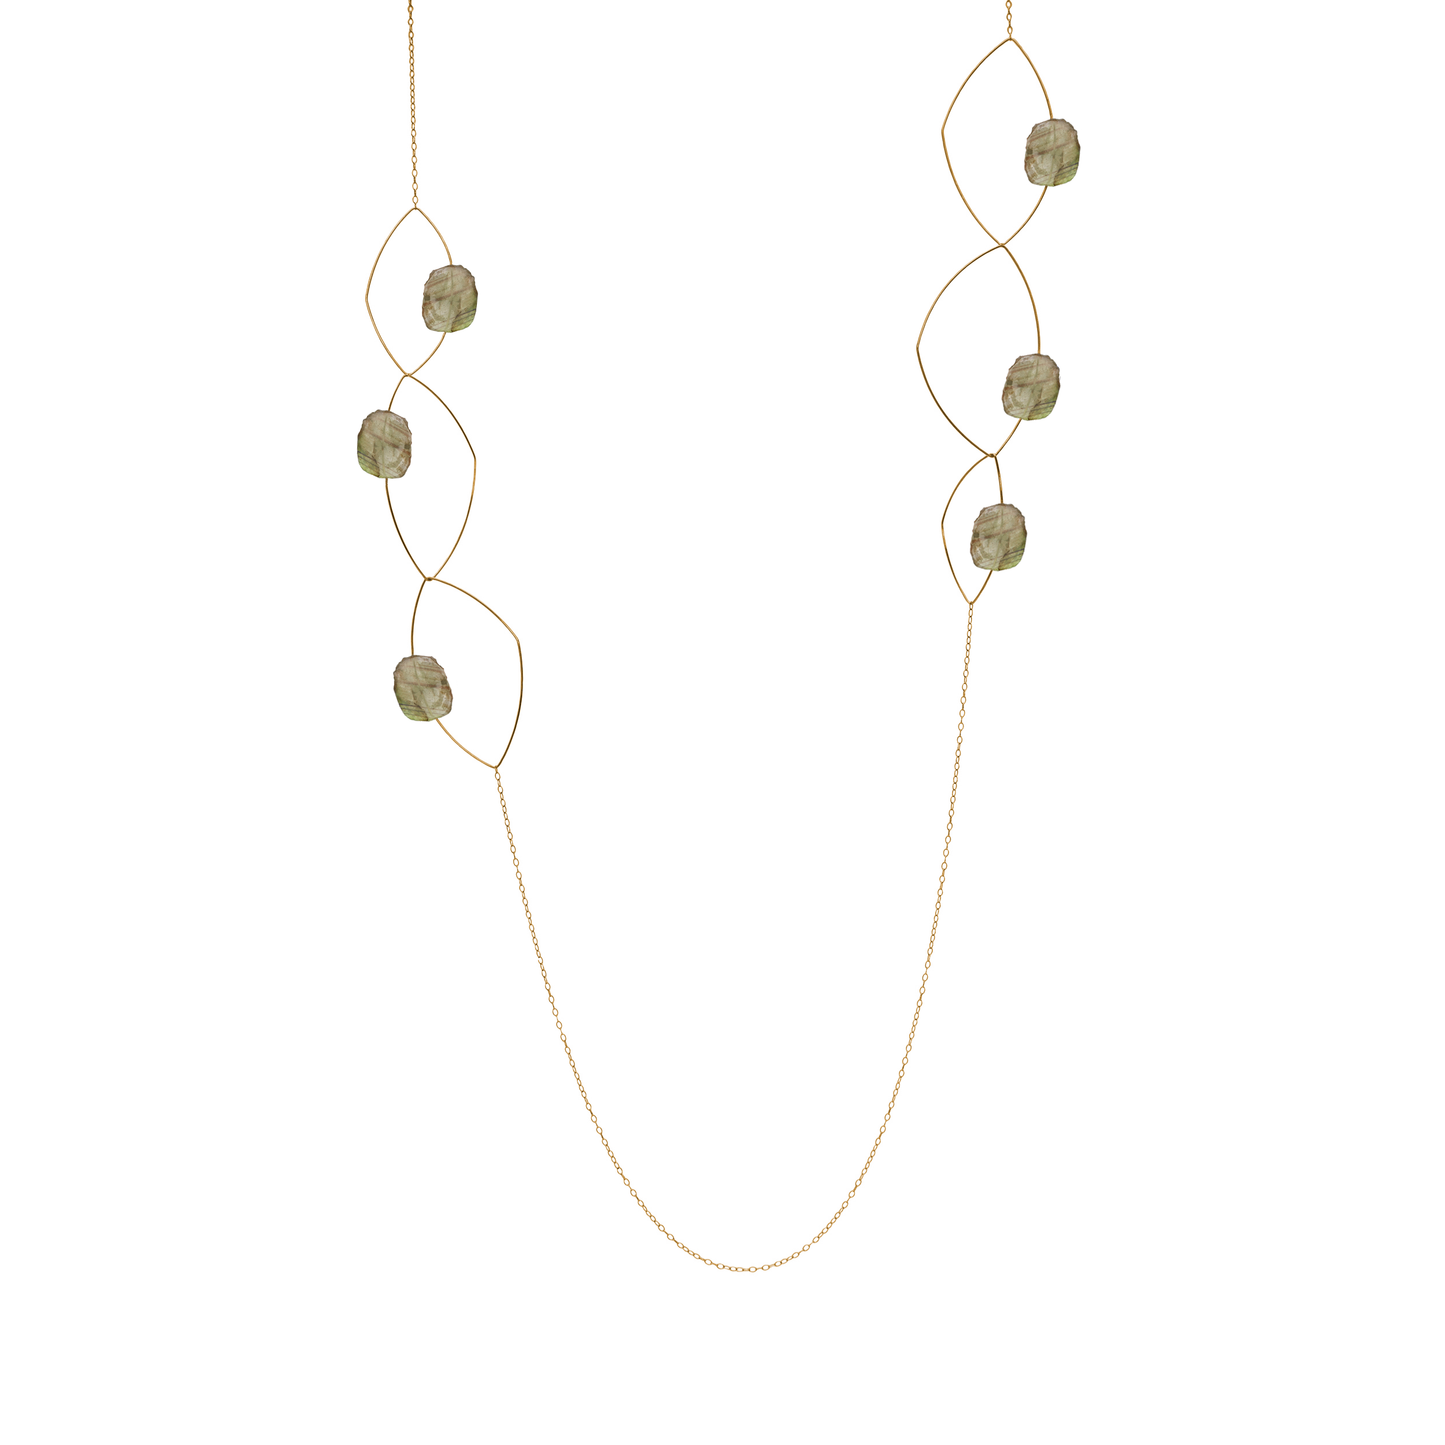 Long 'Morph It!' Necklace with Sliced Gemstones